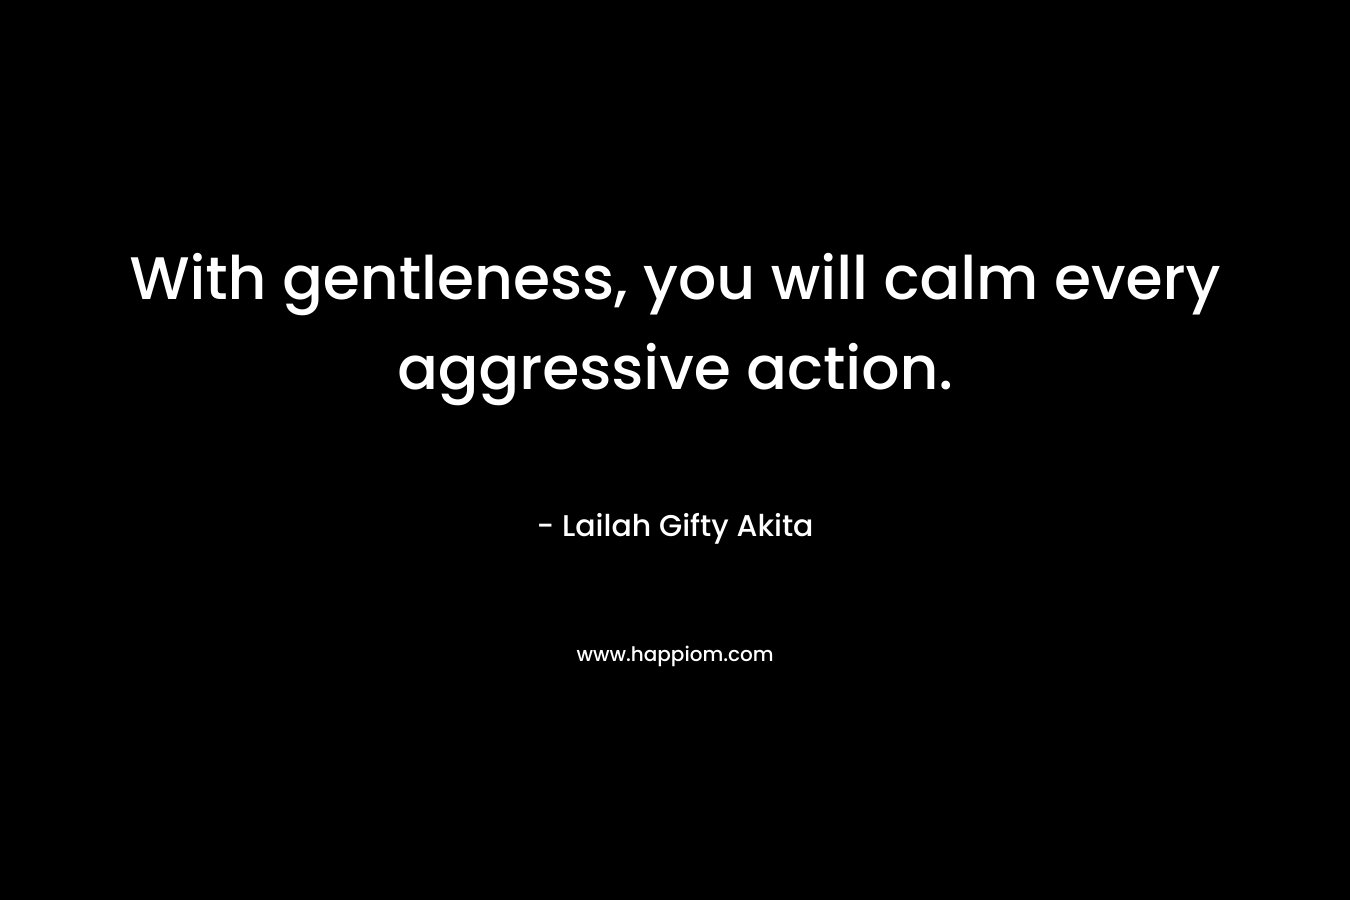 With gentleness, you will calm every aggressive action. – Lailah Gifty Akita